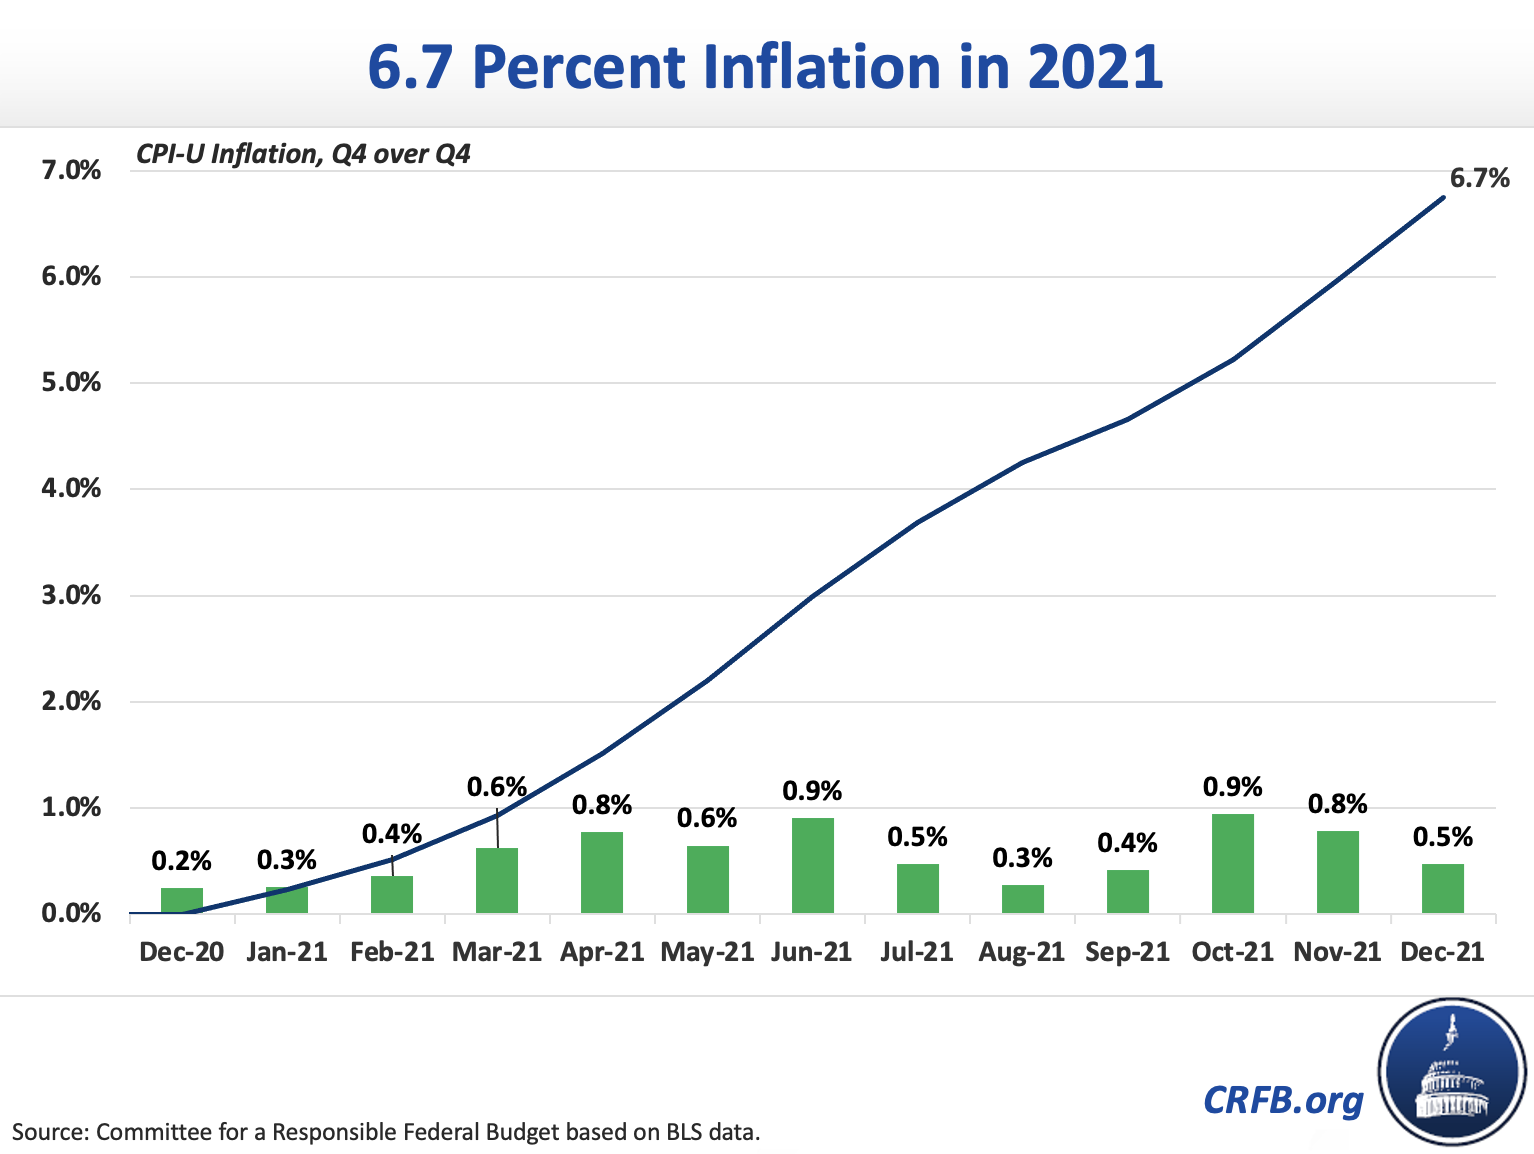 2021 Inflation Totaled 6.7 Percent20220112